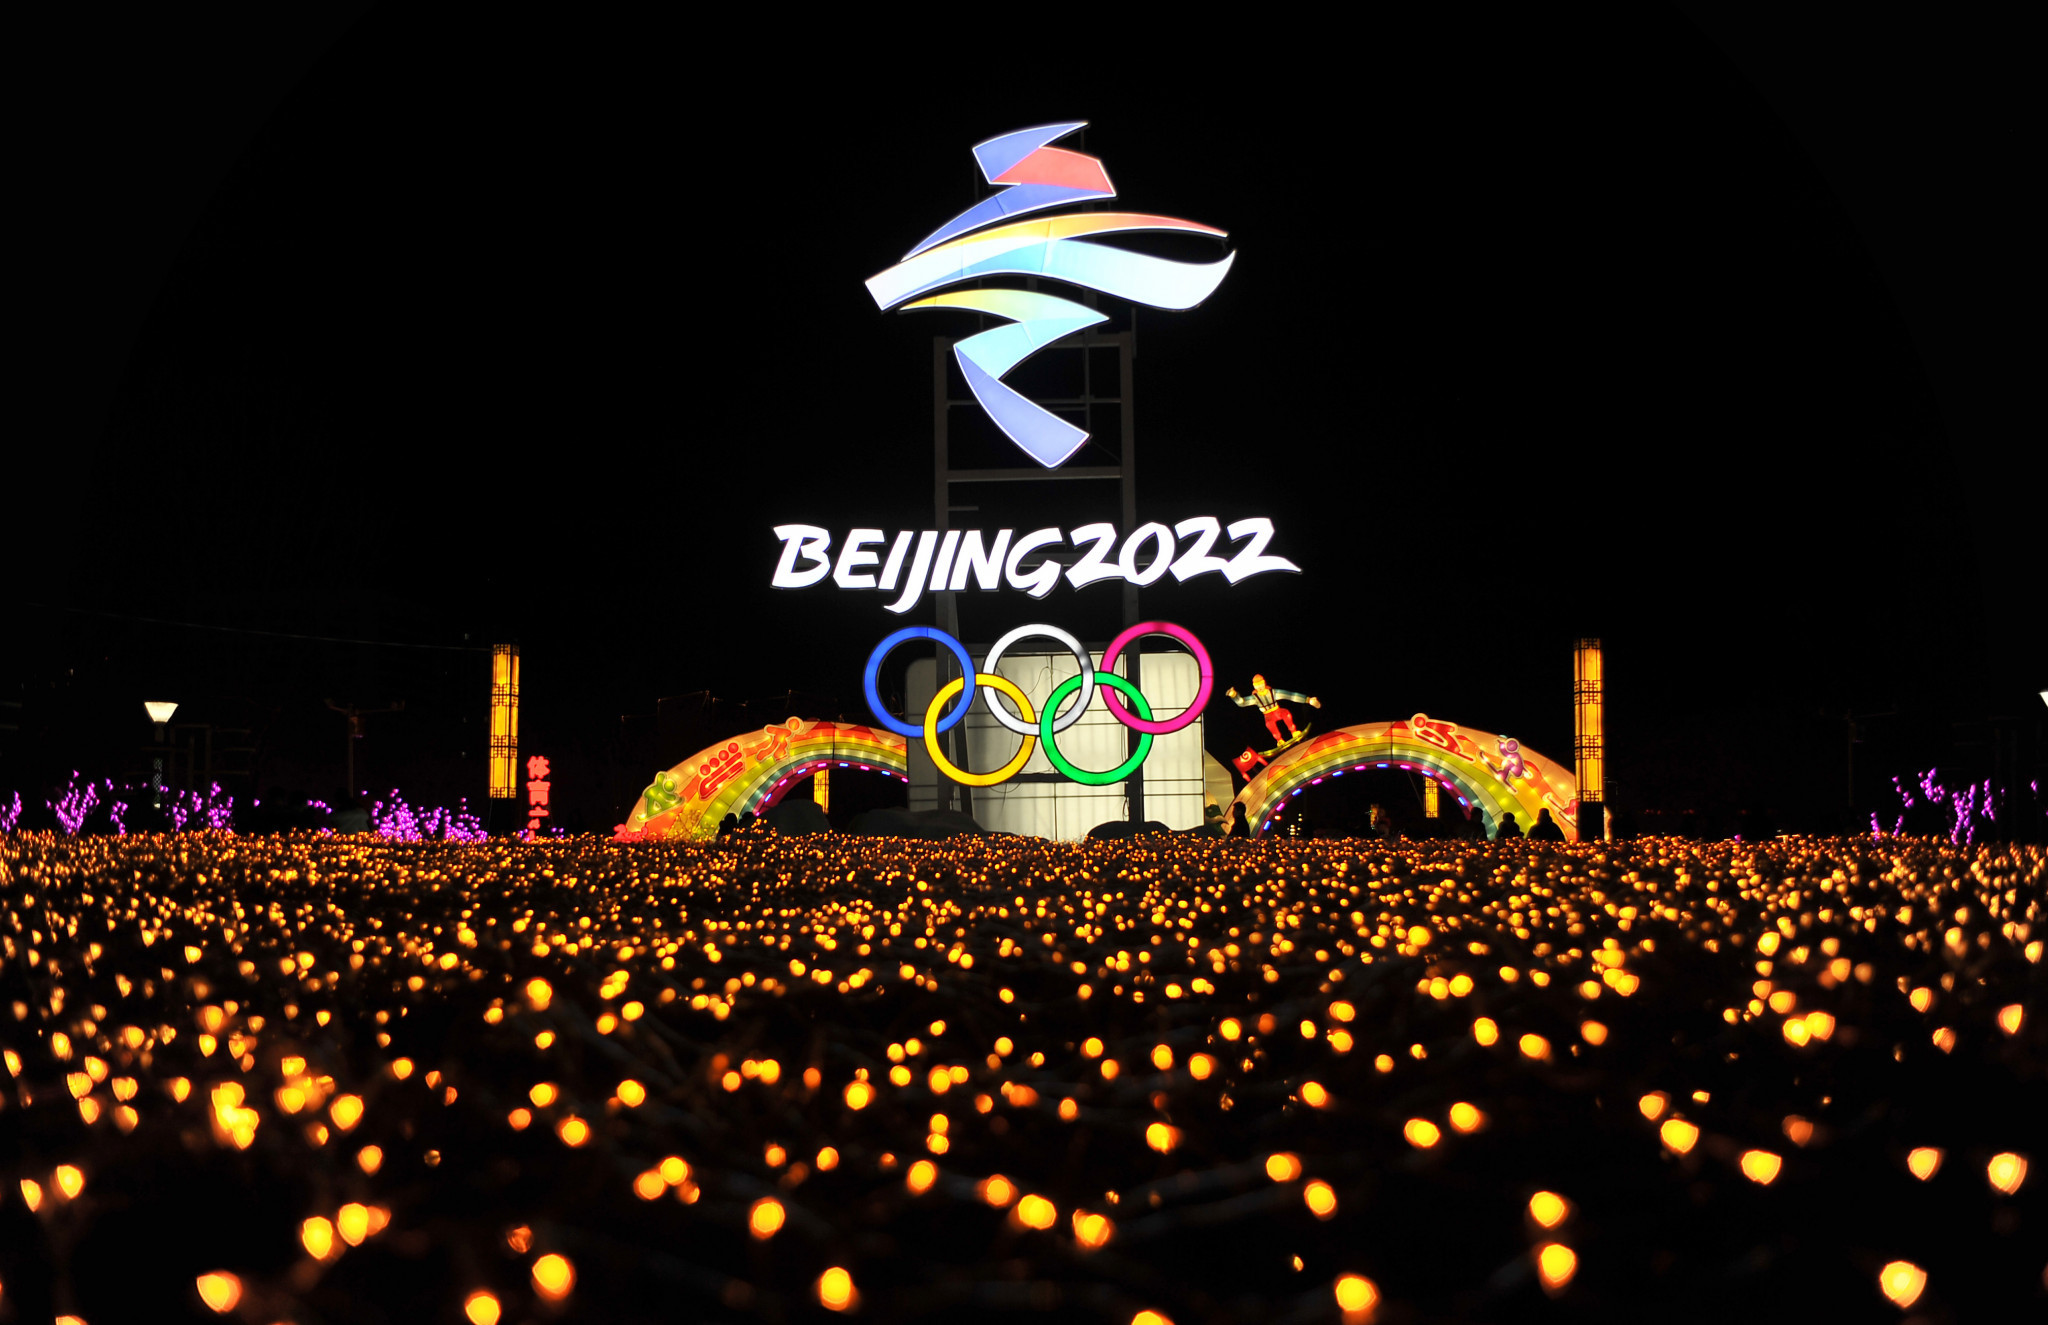 Beijing 2022 looking to learn from Pyeongchang 2018